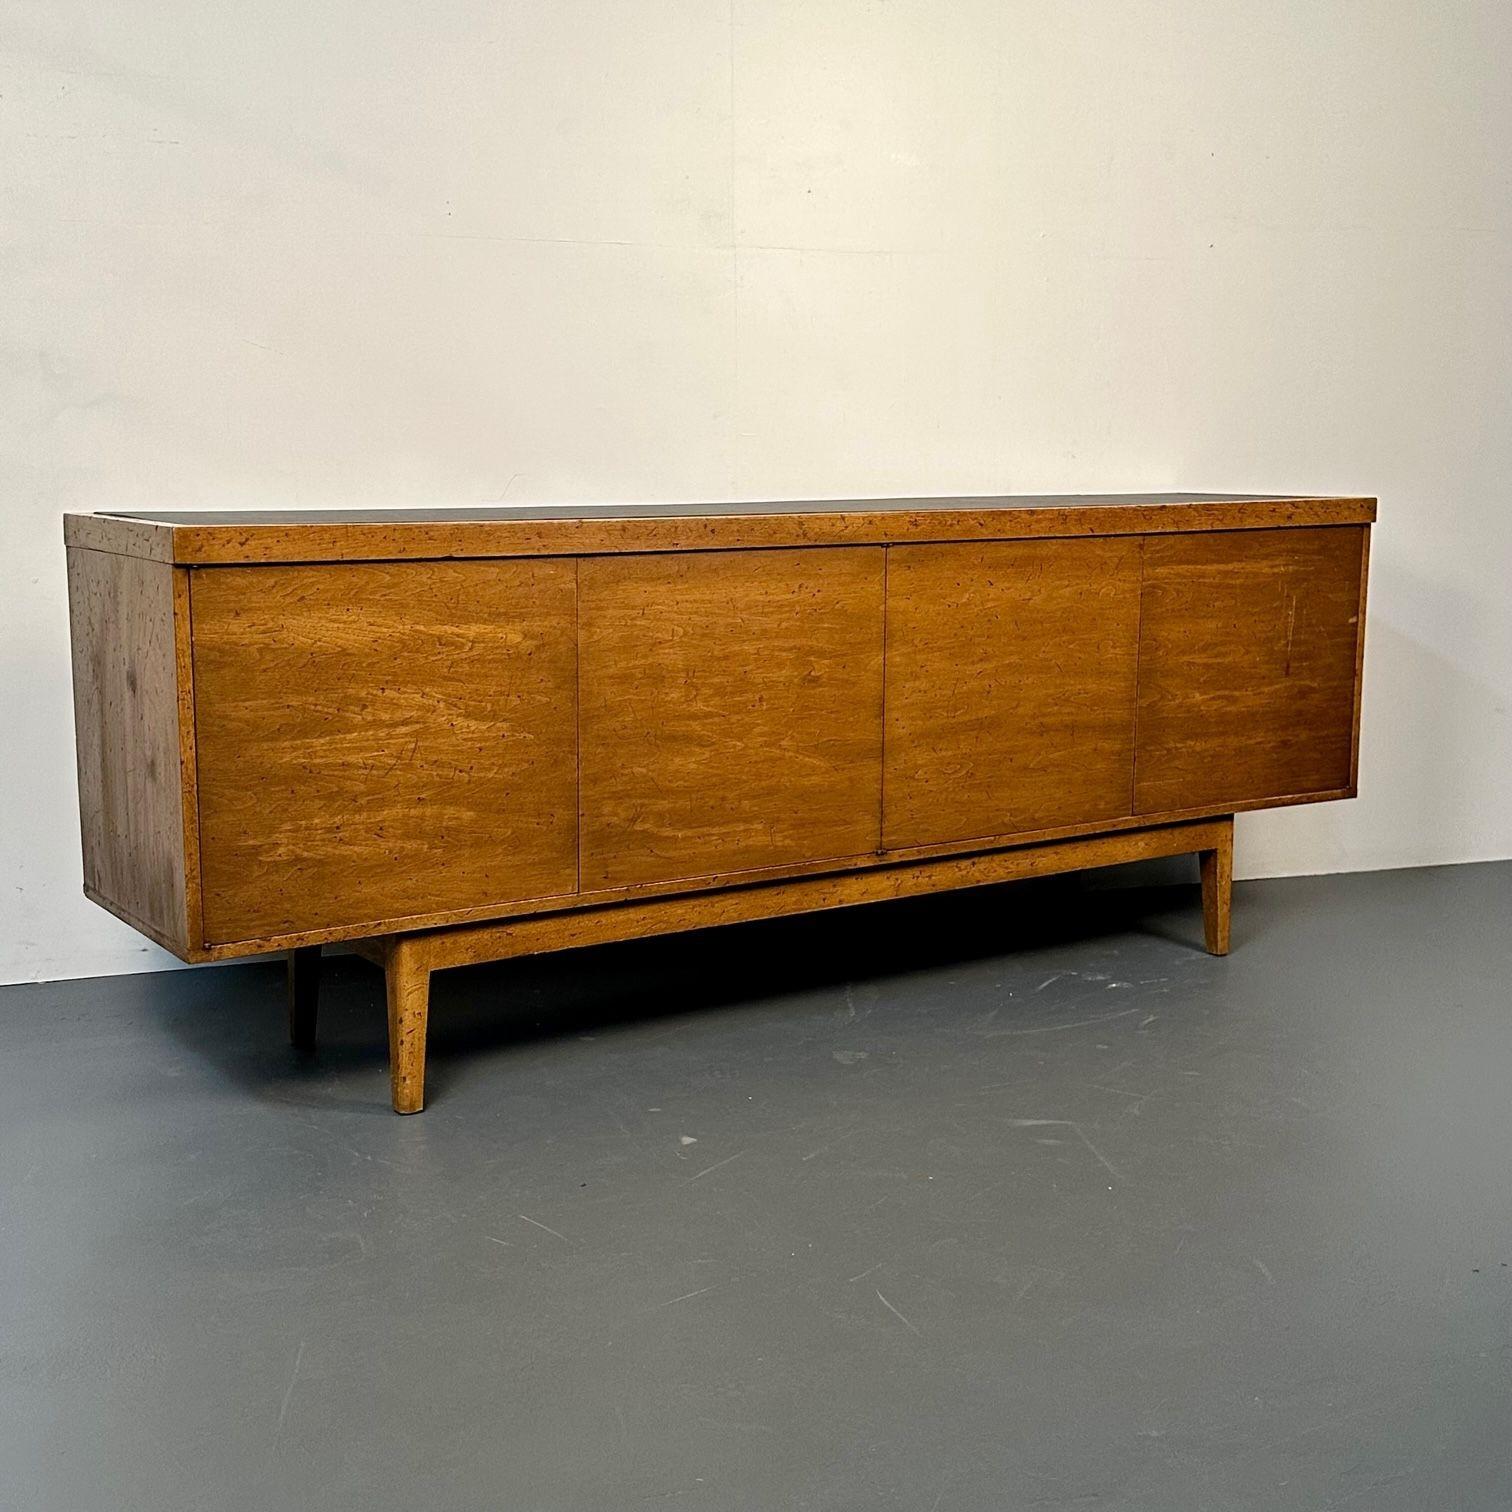 Mid-20th Century Mid-Century Modern Sideboard / Credenza, Rustic Provincial Cabinet, Slate Top For Sale